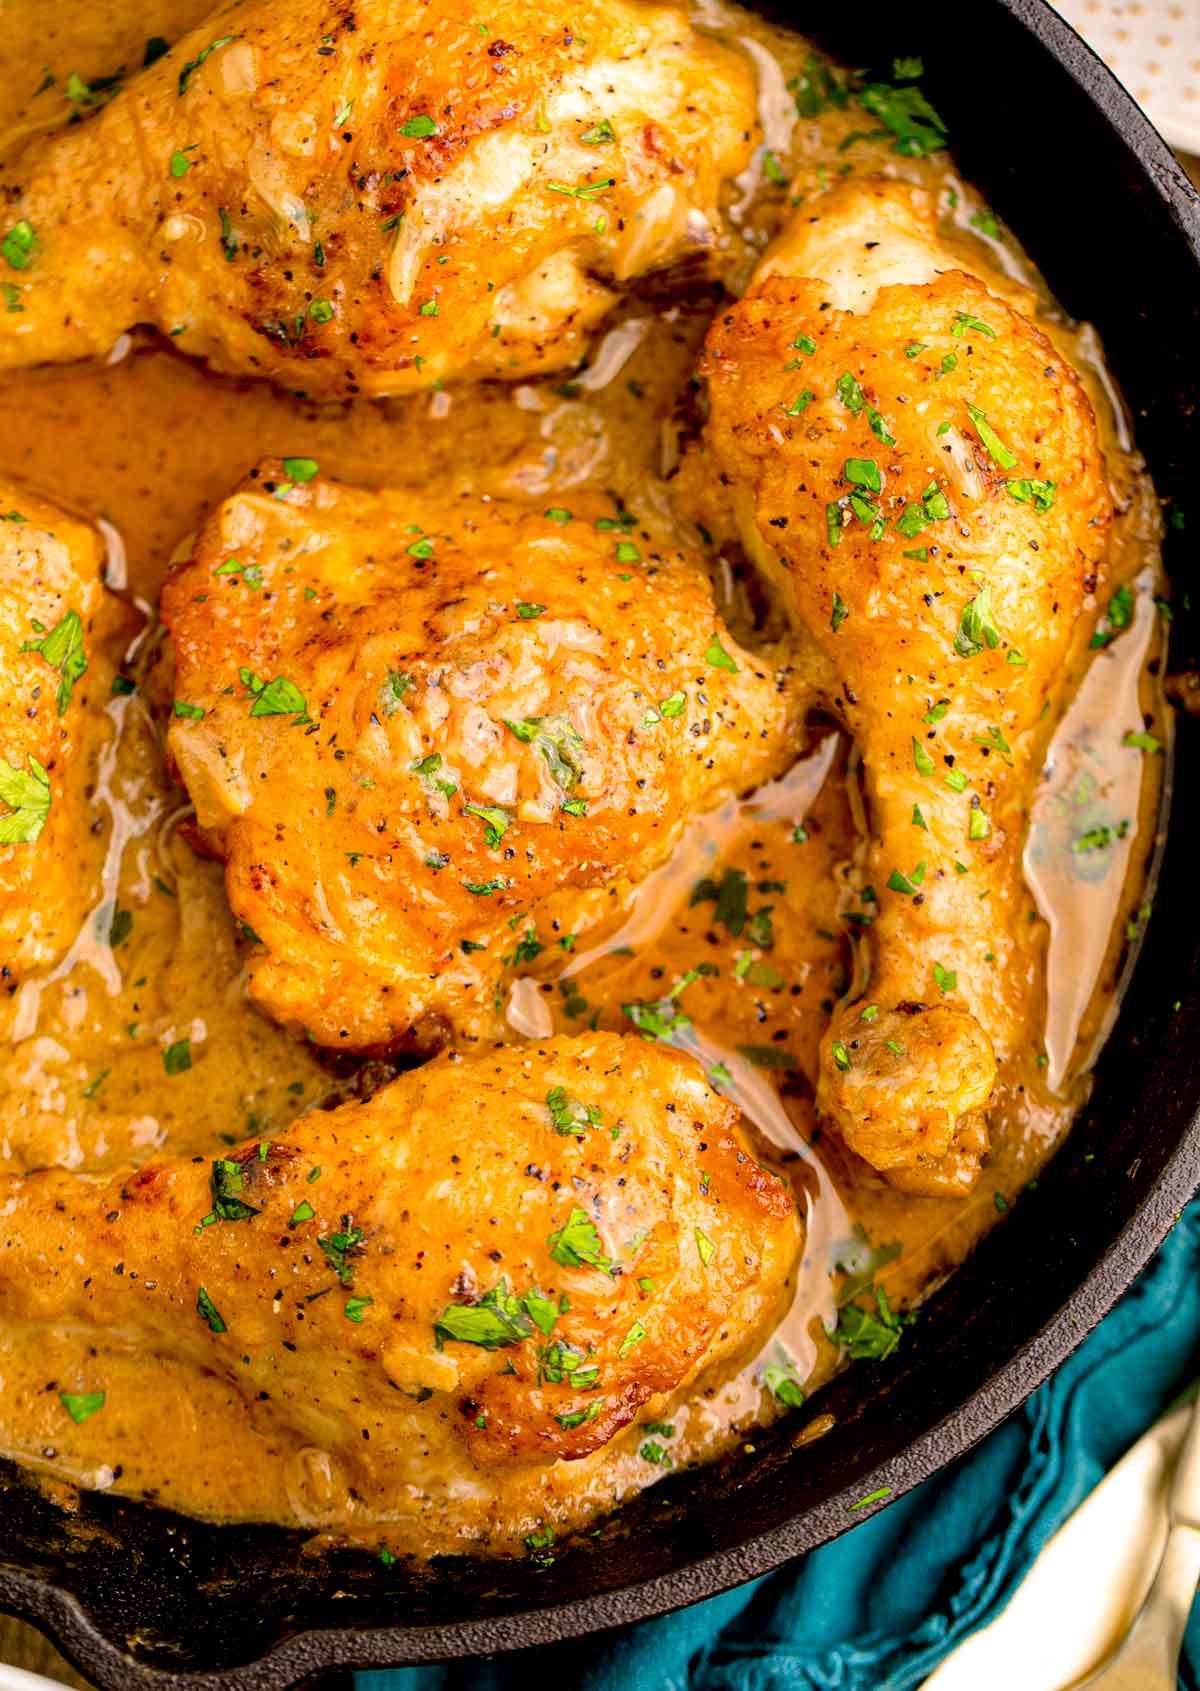 Baked Smothered Chicken with Gravy - Razzle Dazzle Life